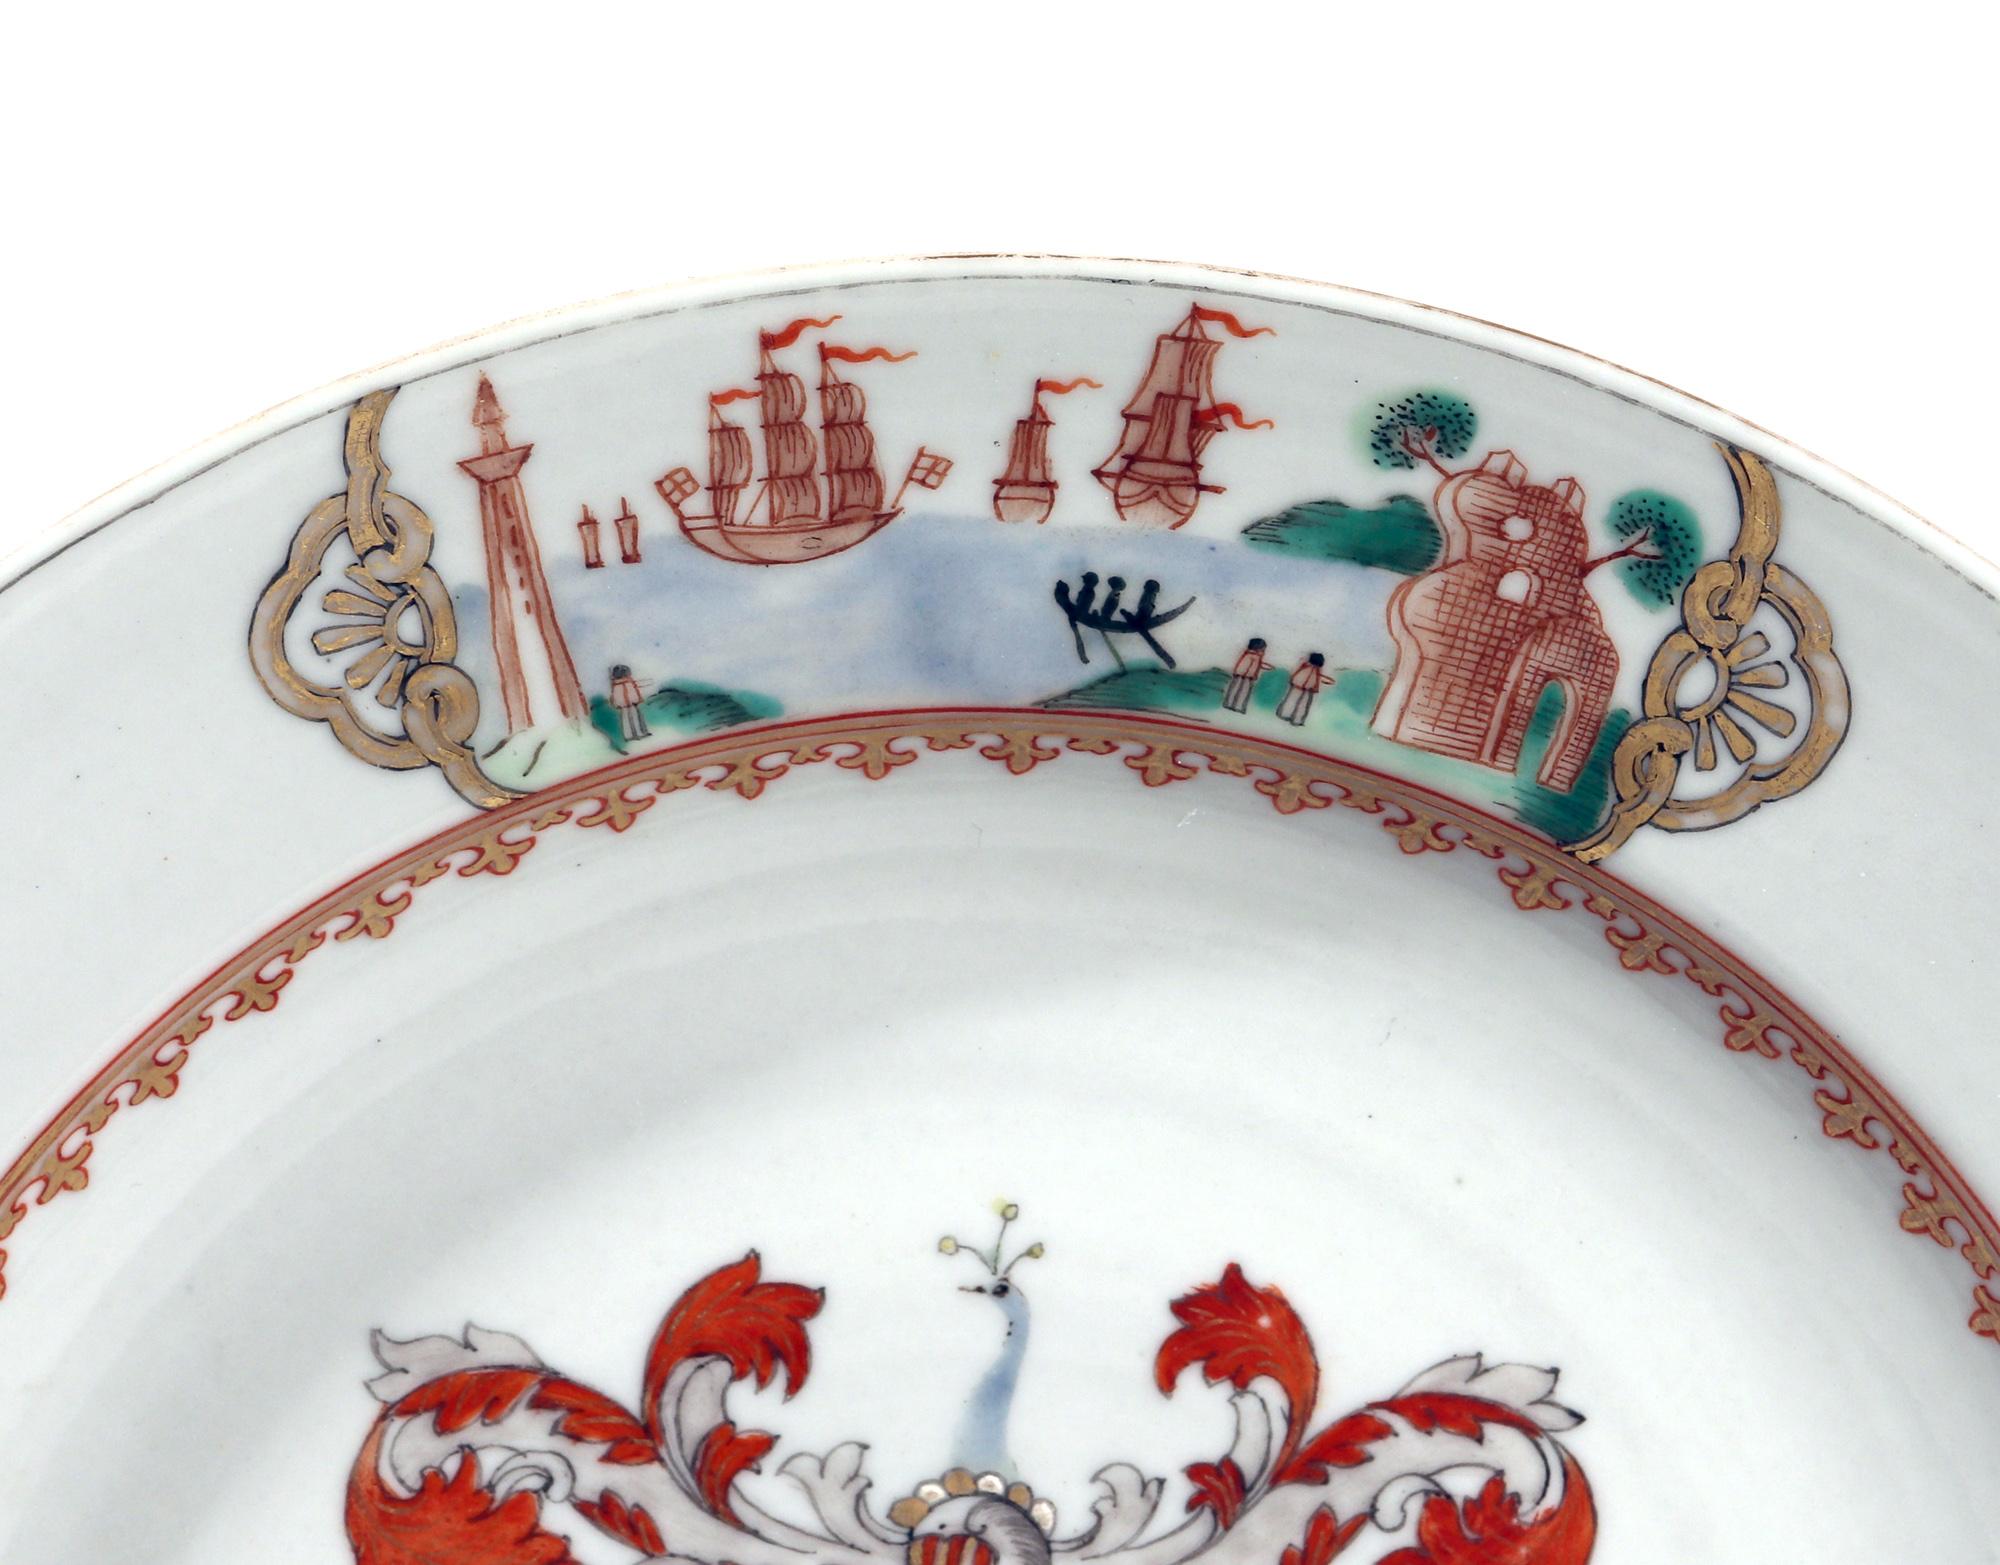 Chinese Export Porcelain armorial plate, 
Coat of Arms of Arbuthnott,
Circa 1745

The Chinese armorial porcelain plate is painted in famille rose enamels with the Arms of Arbuthnott in the center and with the motto Laus Deo (Praise be to God)